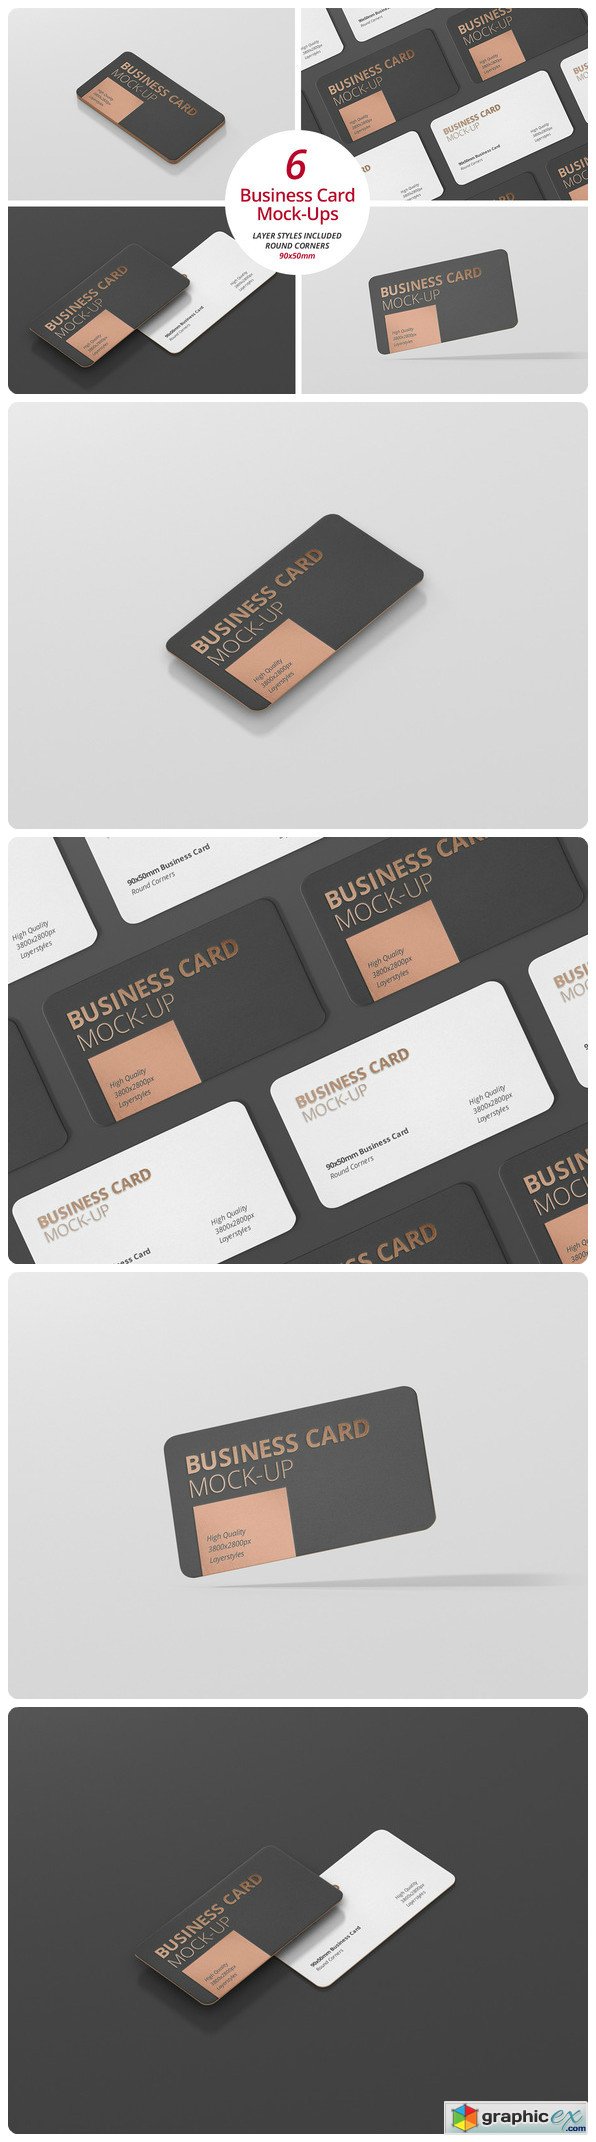 Download Business Card Mockup Round Corner Free Download Vector Stock Image Photoshop Icon Yellowimages Mockups